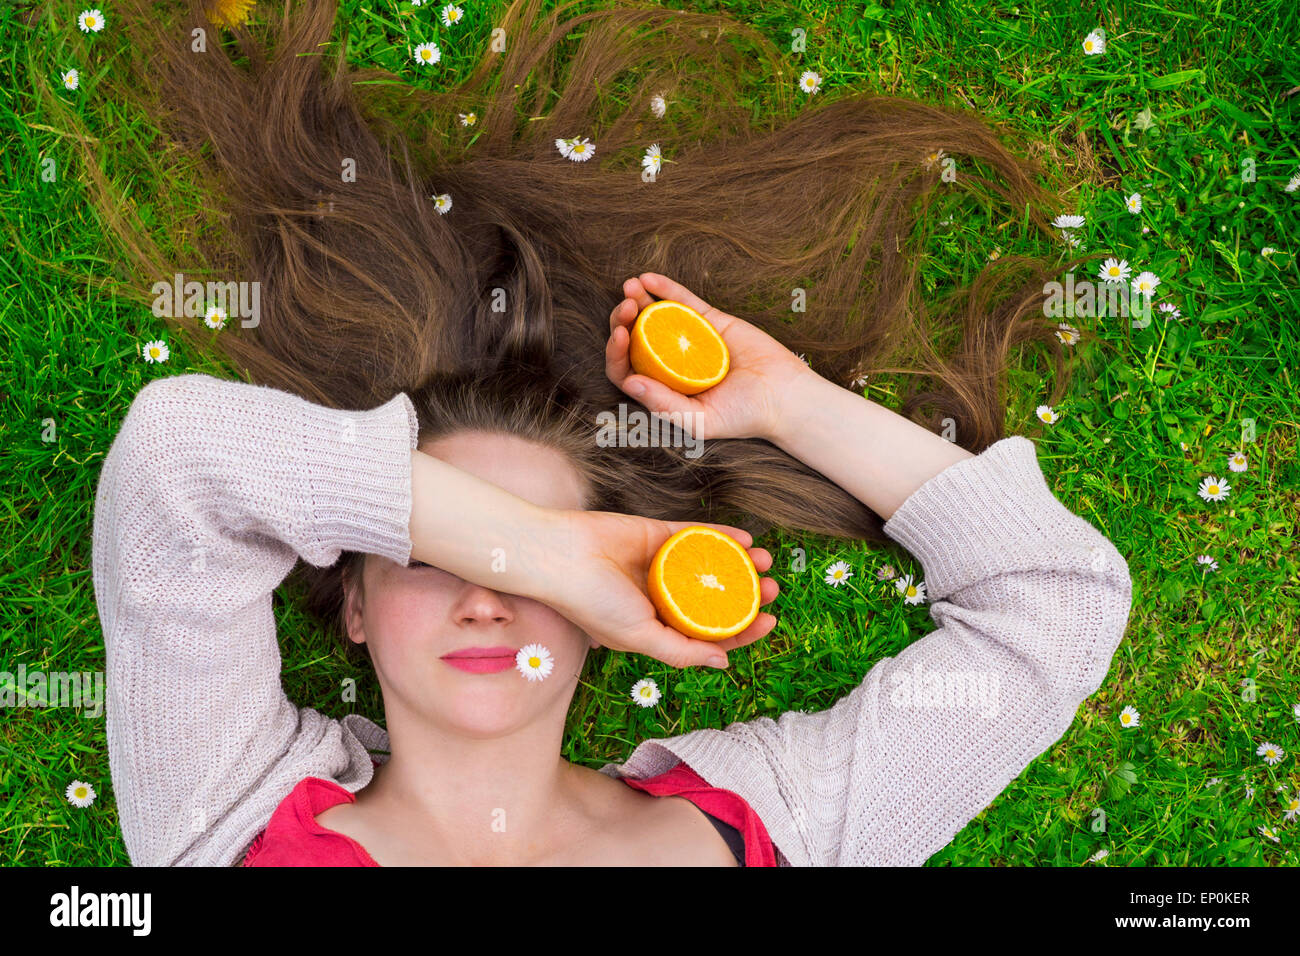 Young woman laying on a grass field holding oranges Banque D'Images